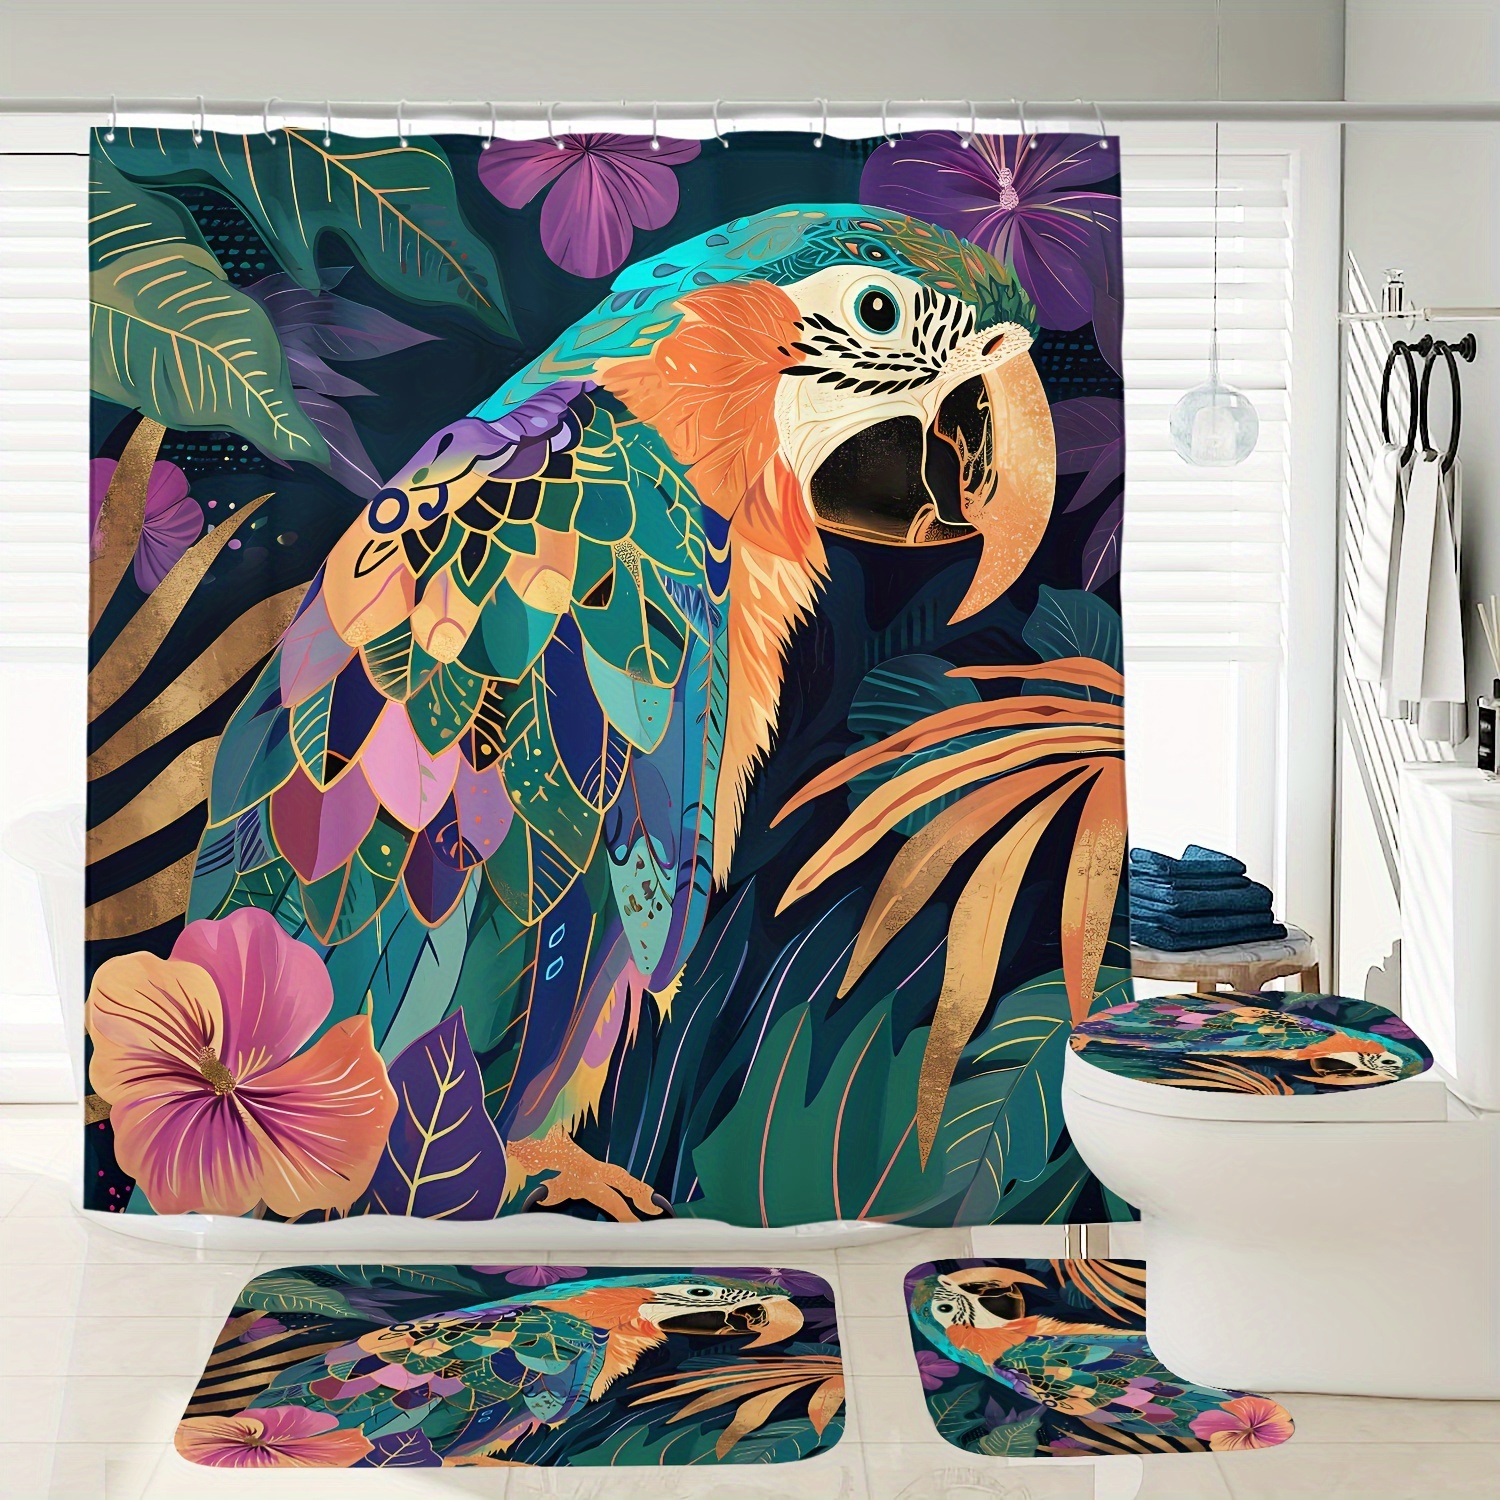 

Vibrant Parrot And Floral Shower Curtain Set With Toilet Seat Cover And Bath Mats - 72" X 72" - Waterproof And Easy To Clean - Perfect For Modern Home Decor